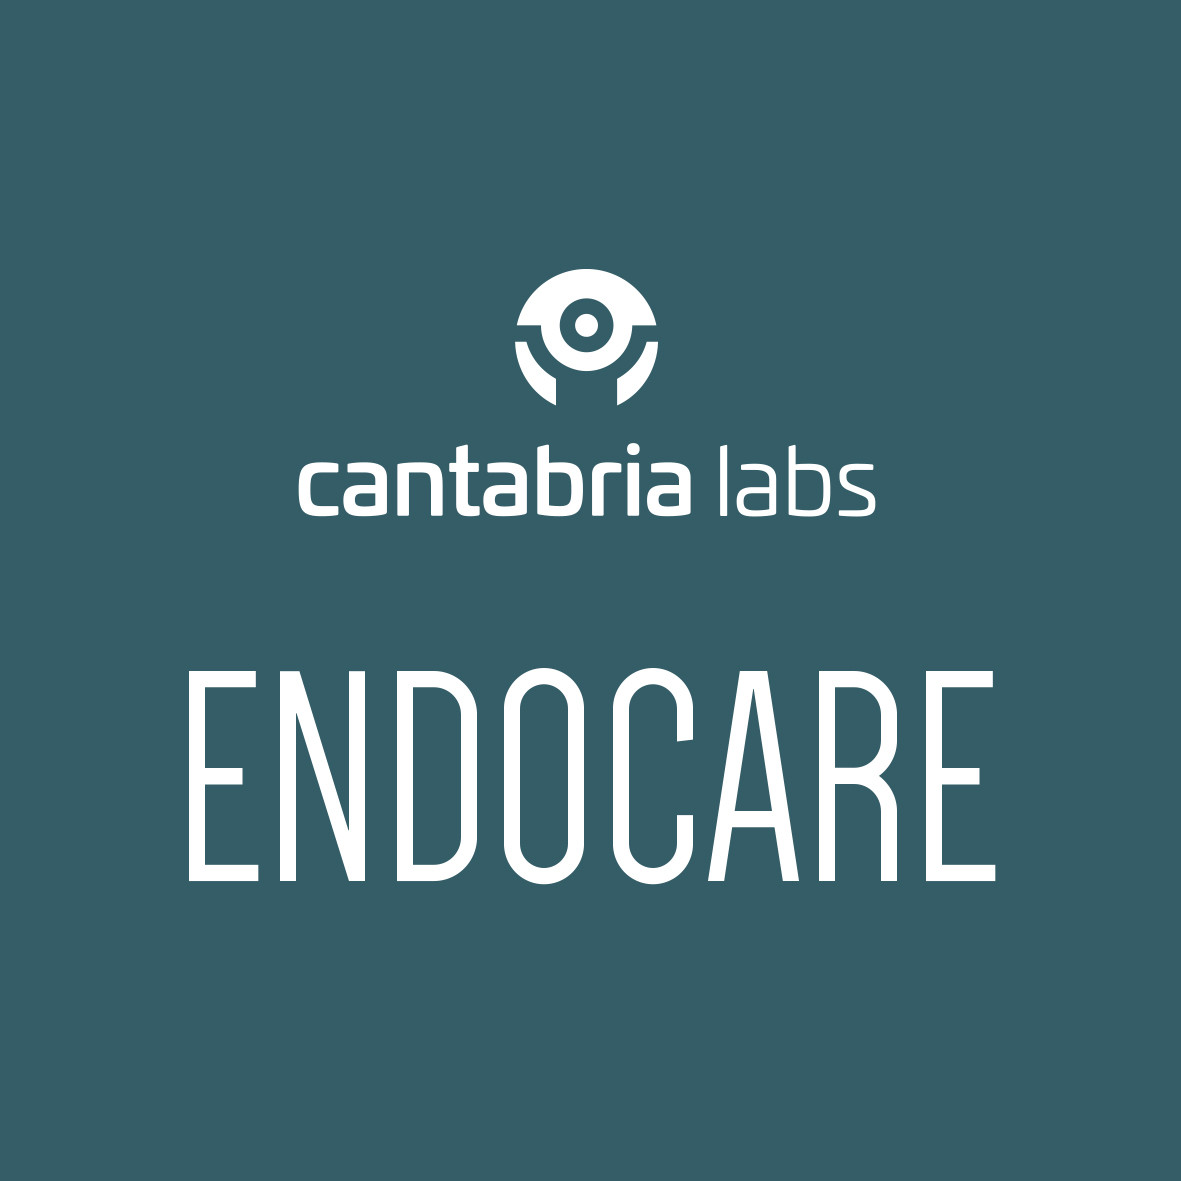 ENDOCARE by CANTABRIA LABS